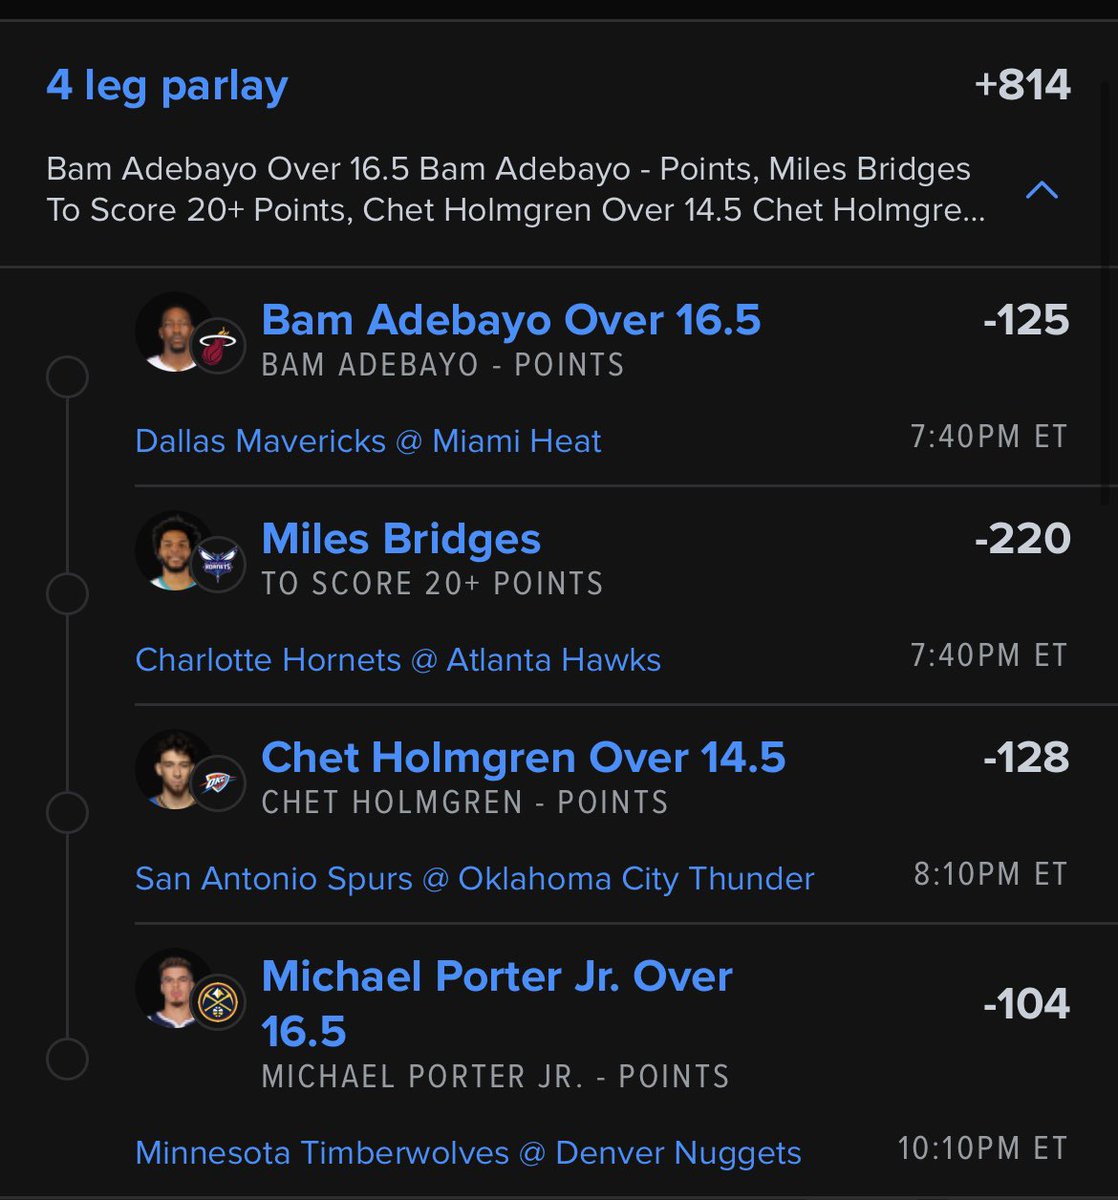 💰 +814 Odds Parlay Points parlay I’m liking for tonight! Let’s get it! 🫡 #gamblingx Full card posted here: whop.com/premierpicks/